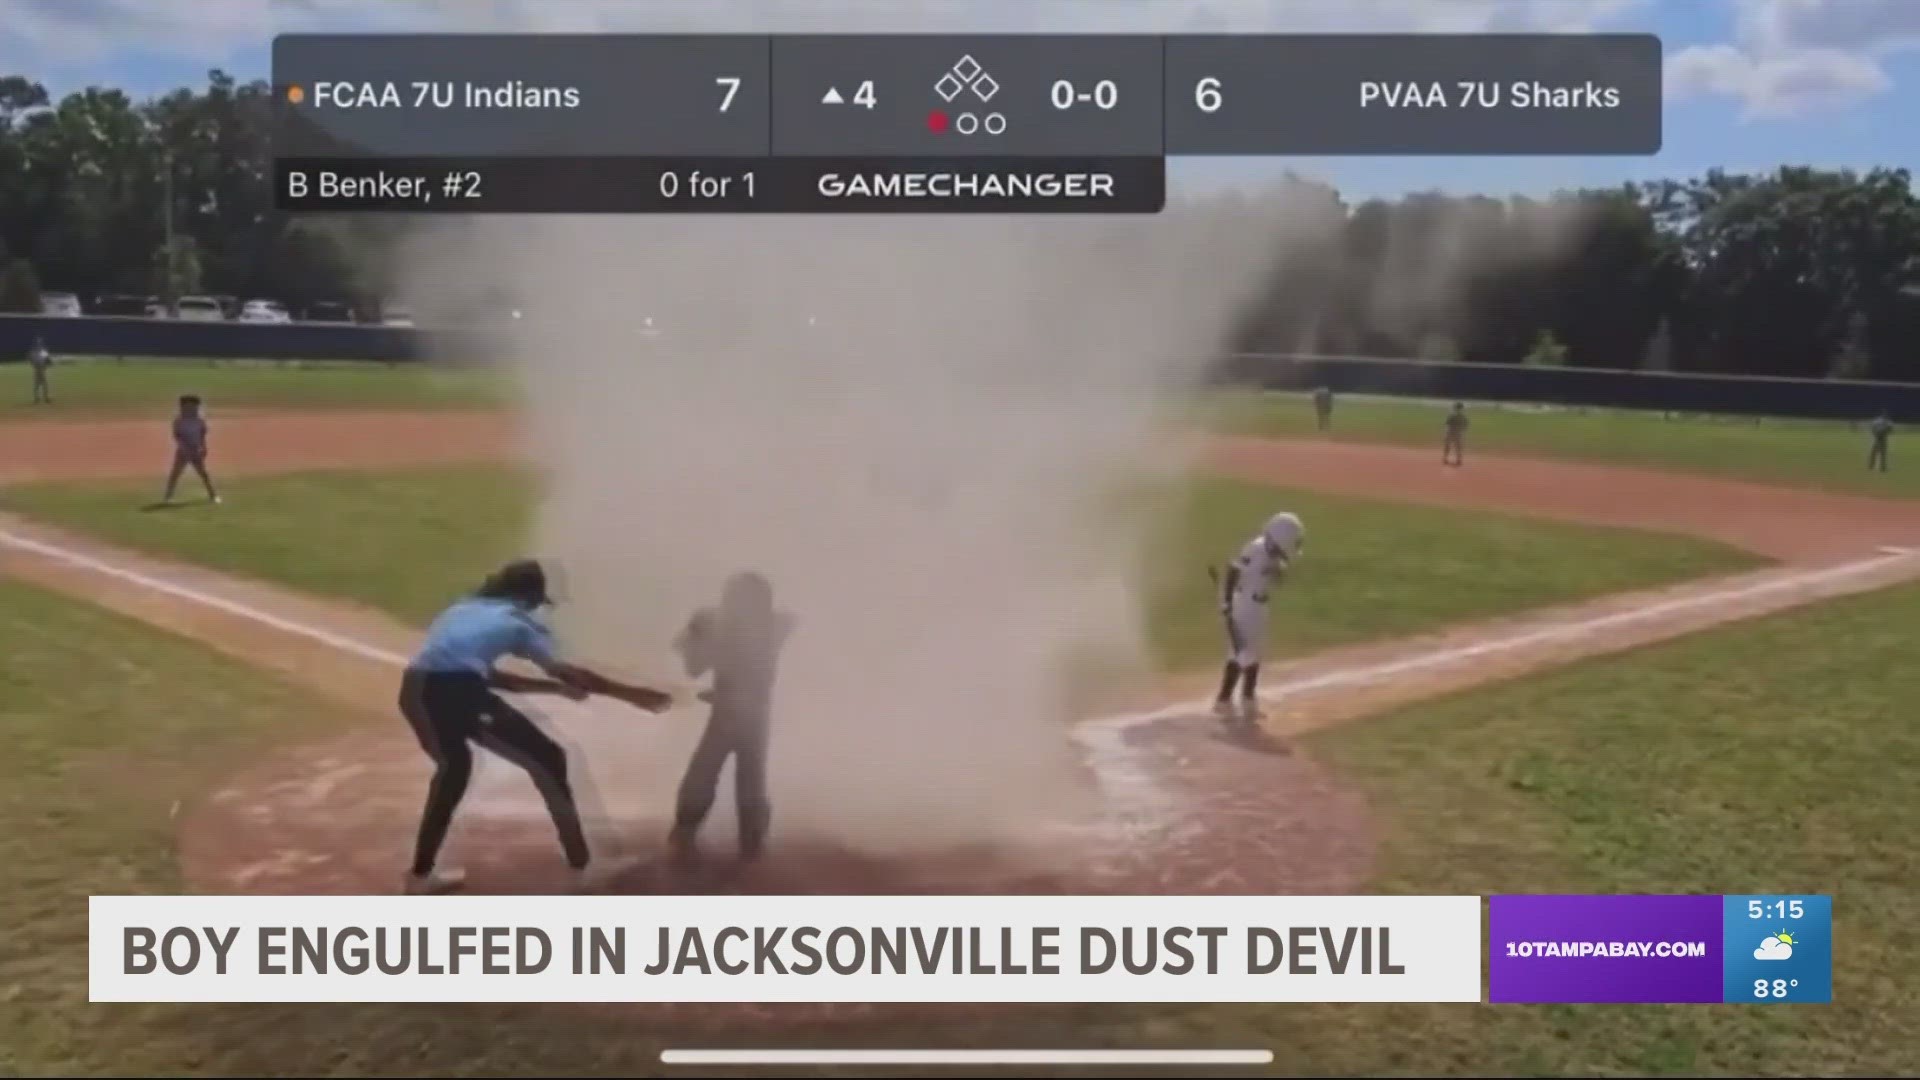 The teen umpire managed to battle the wind to save the catcher who was trapped in the dust devil.